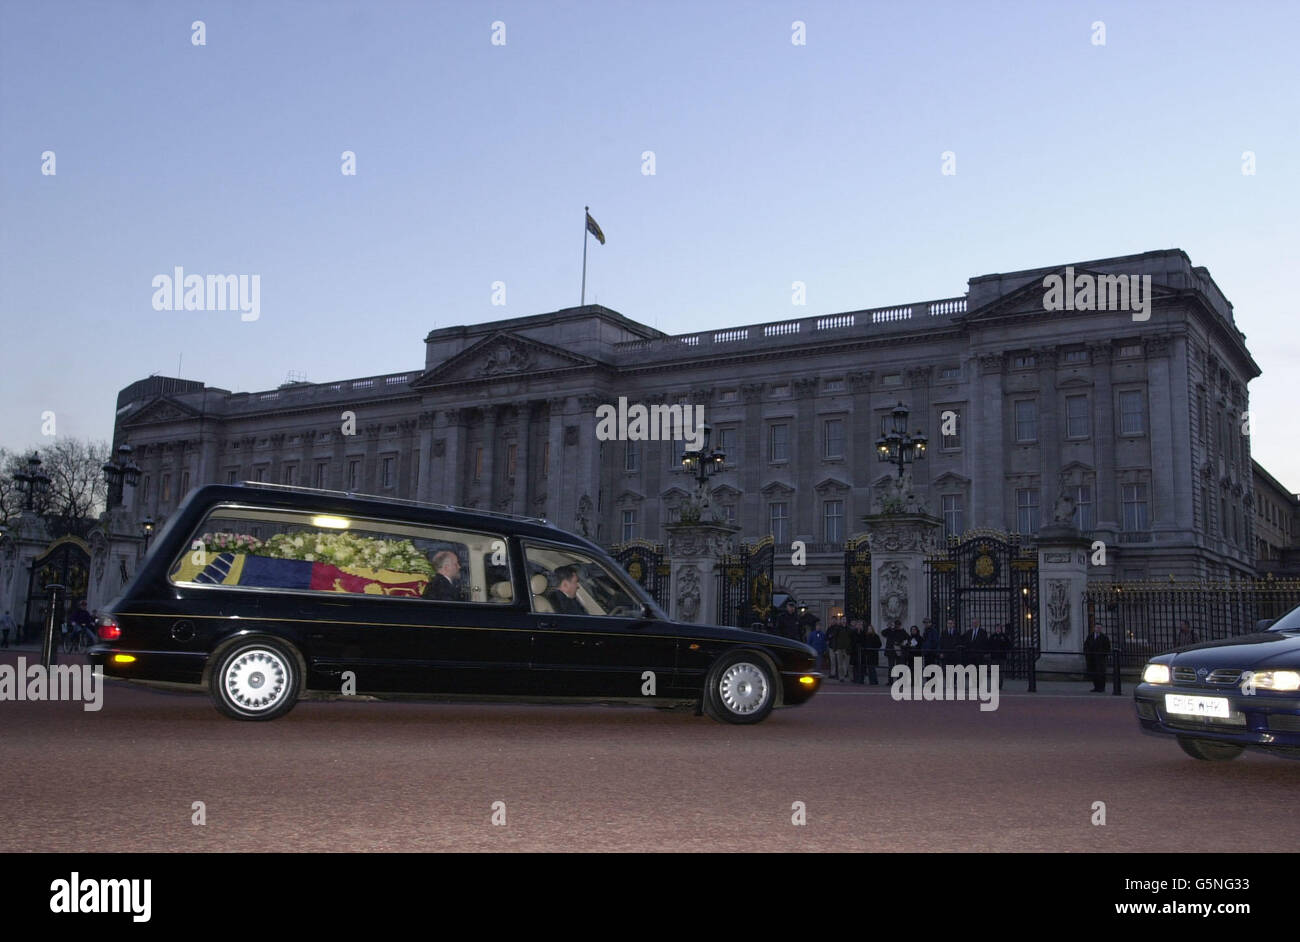 The hearse carrying the coffin of Princess Margaret - the younger sister of Britain's Queen Elizabeth II - passes Buckingham Palace, as it travels from The Queen's Chapel at St James's Palace to Windsor Castle for her funeral. Stock Photo